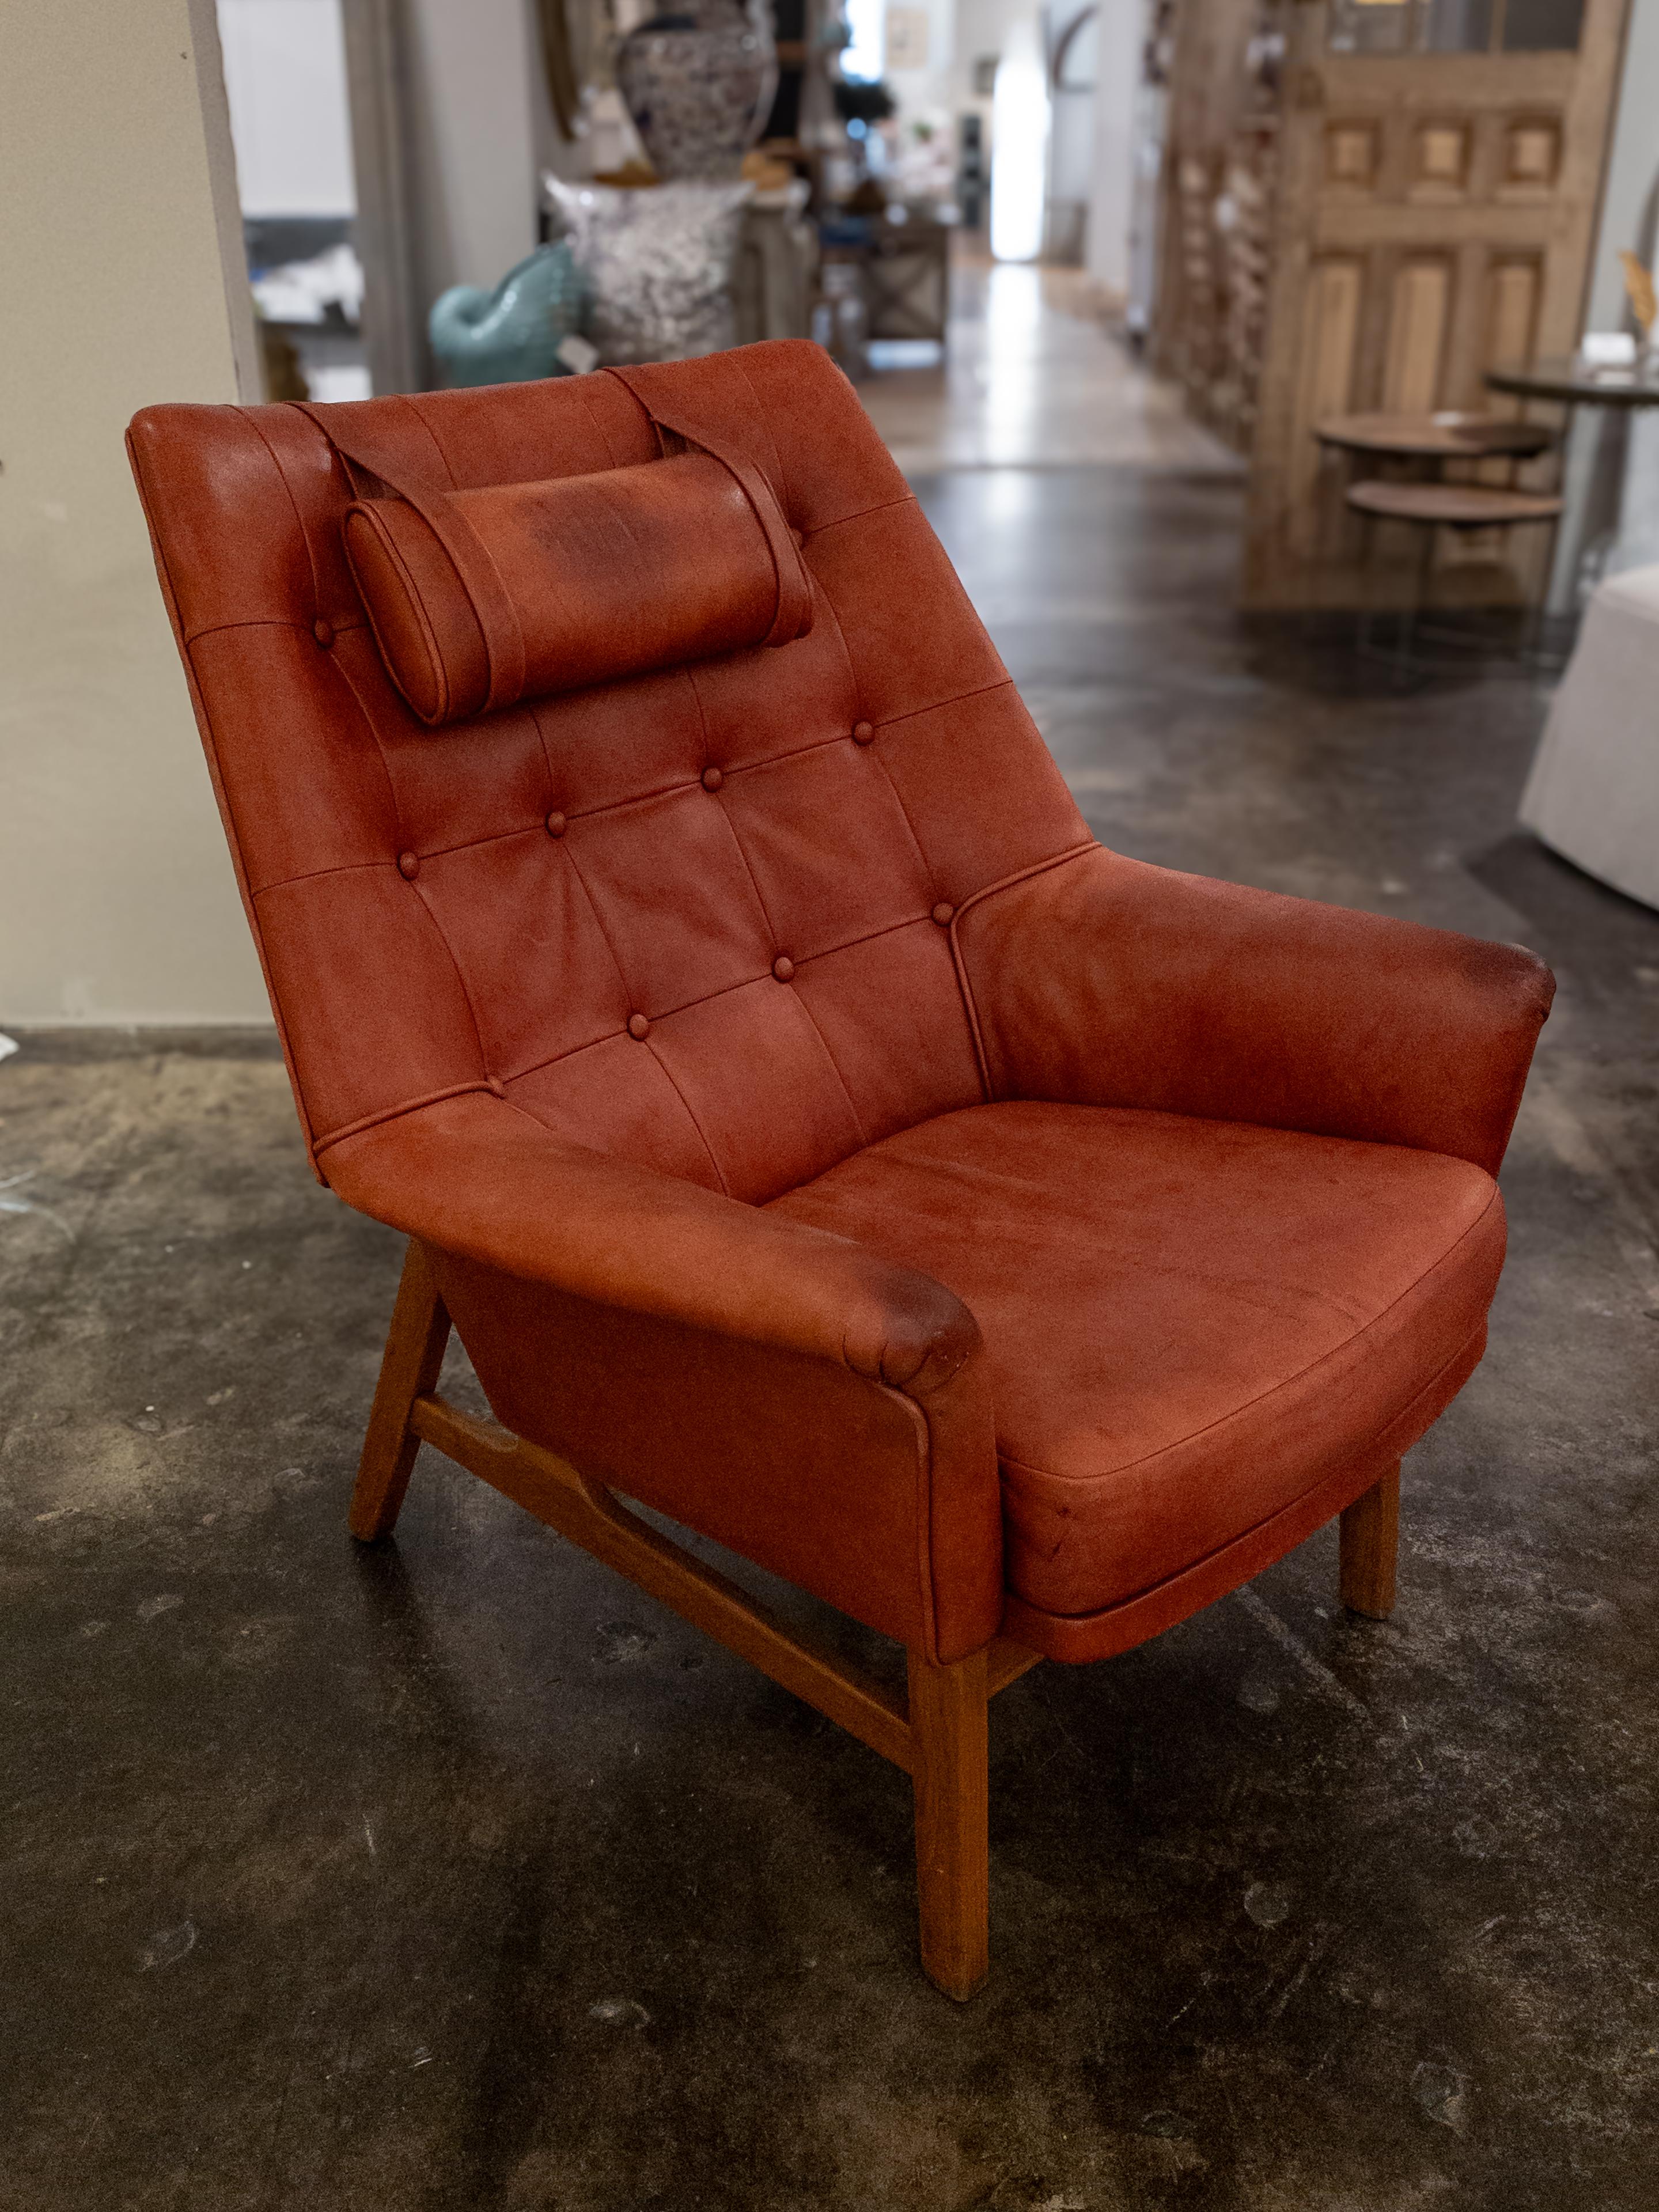 The Tove & Edvard Kindt-Larsen Leather Lounge Chair is a Danish masterpiece of mid-century design, originating from the prestigious Illuns Bolighus Dontique in Denmark during the 1960s. This iconic piece is a testament to the creative brilliance of